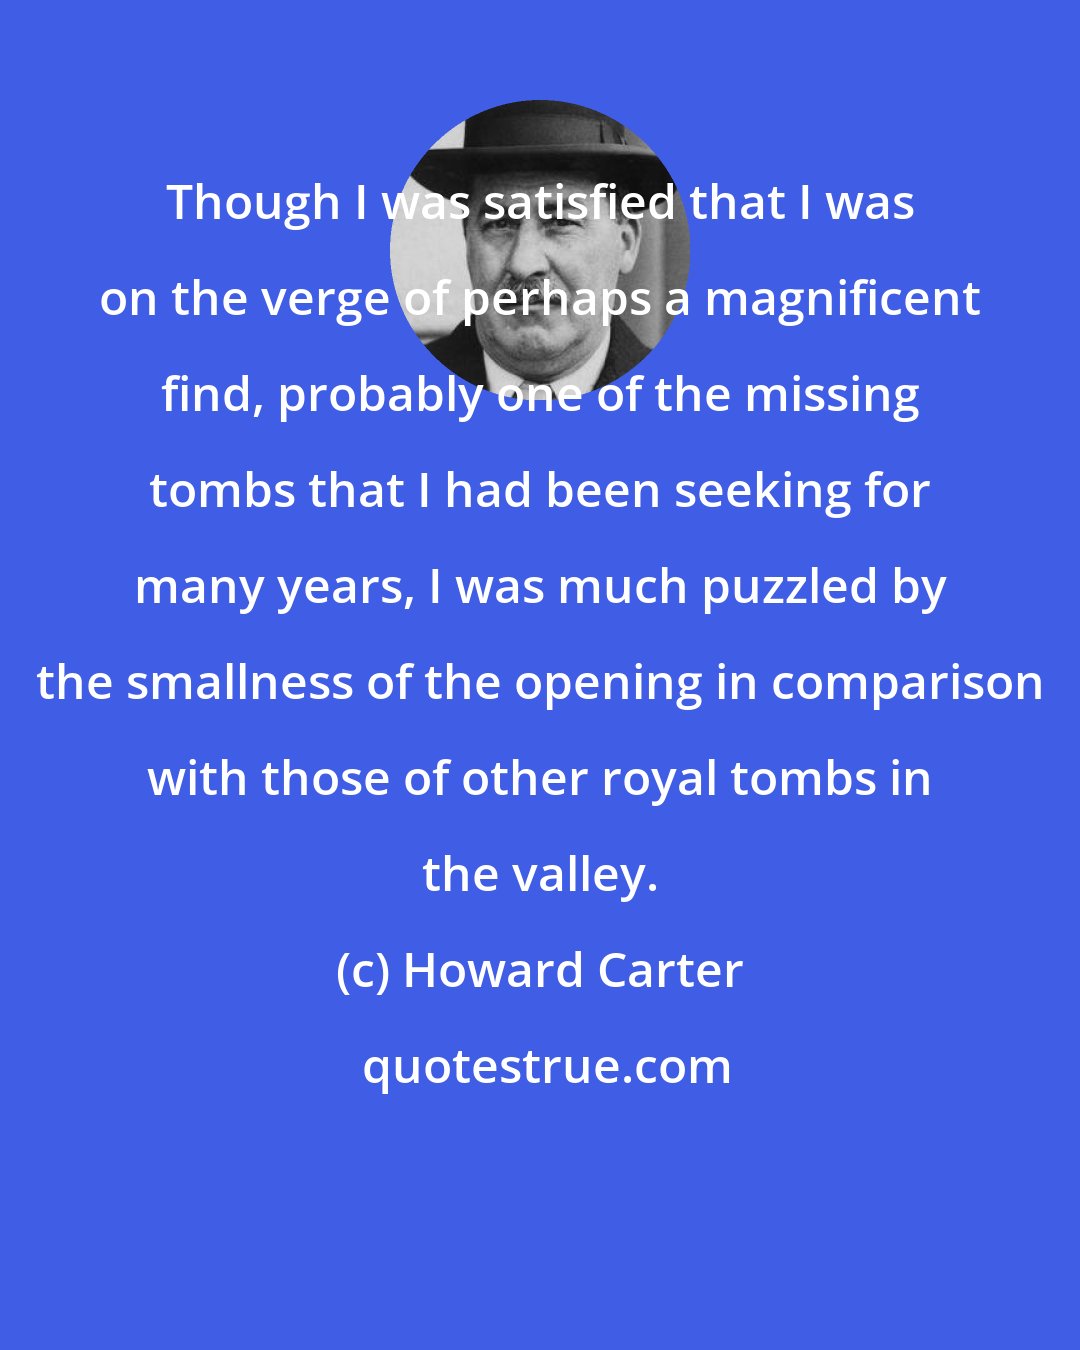 Howard Carter: Though I was satisfied that I was on the verge of perhaps a magnificent find, probably one of the missing tombs that I had been seeking for many years, I was much puzzled by the smallness of the opening in comparison with those of other royal tombs in the valley.